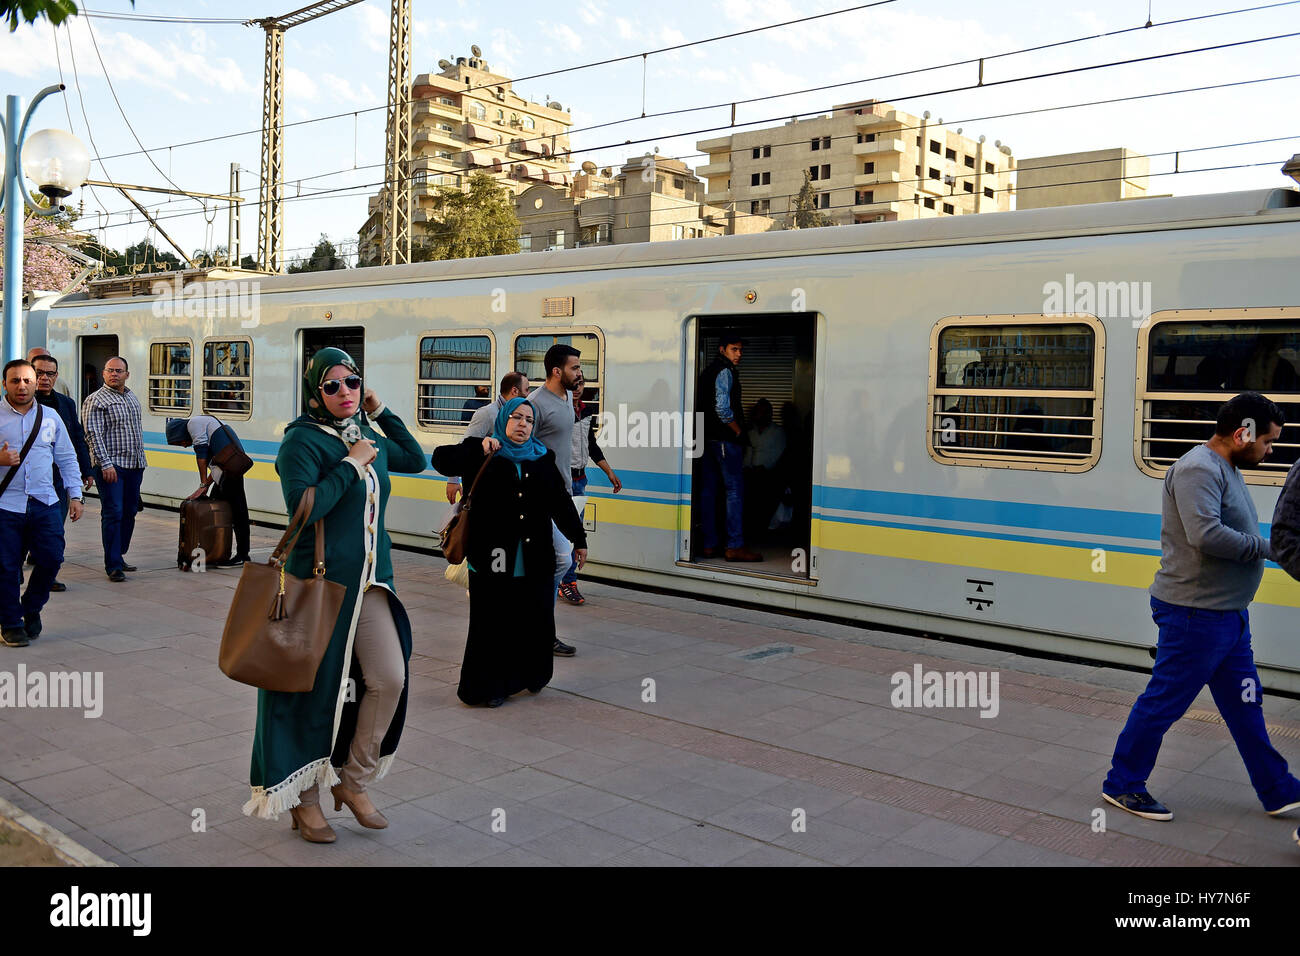 Cairo. 31st Mar, 2017. Passengers walk past a metro train at Maadi metro station in Cairo, Egypt on March 31, 2017. Egypt has doubled Cairo metro fare amid financial difficulties and nearly 3.5 million commuters relying on Cairo's metro everyday fumed by the move, as they already suffered sharp rise in living costs. Credit: Zhao Dingzhe/Xinhua/Alamy Live News Stock Photo